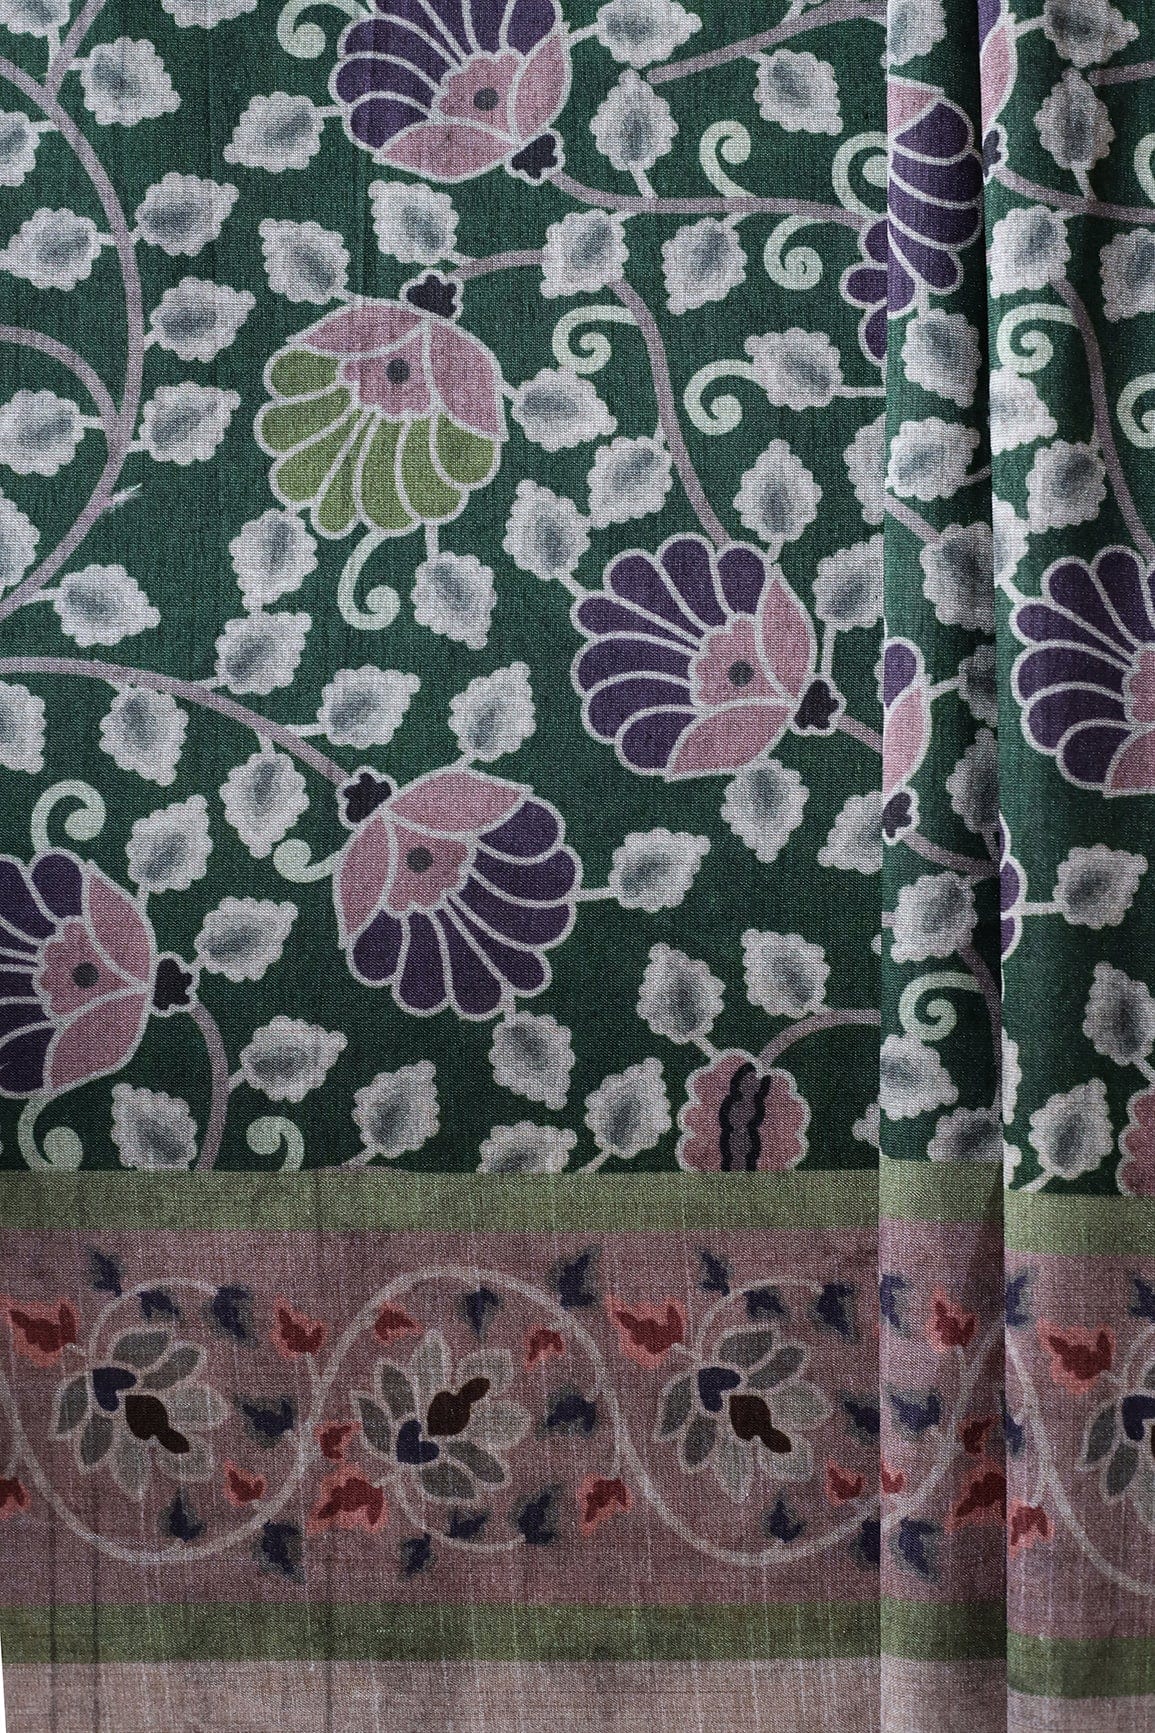 doeraa Prints Bottle Green Floral Pattern Digital Print On Mulberry Silk Fabric With Border